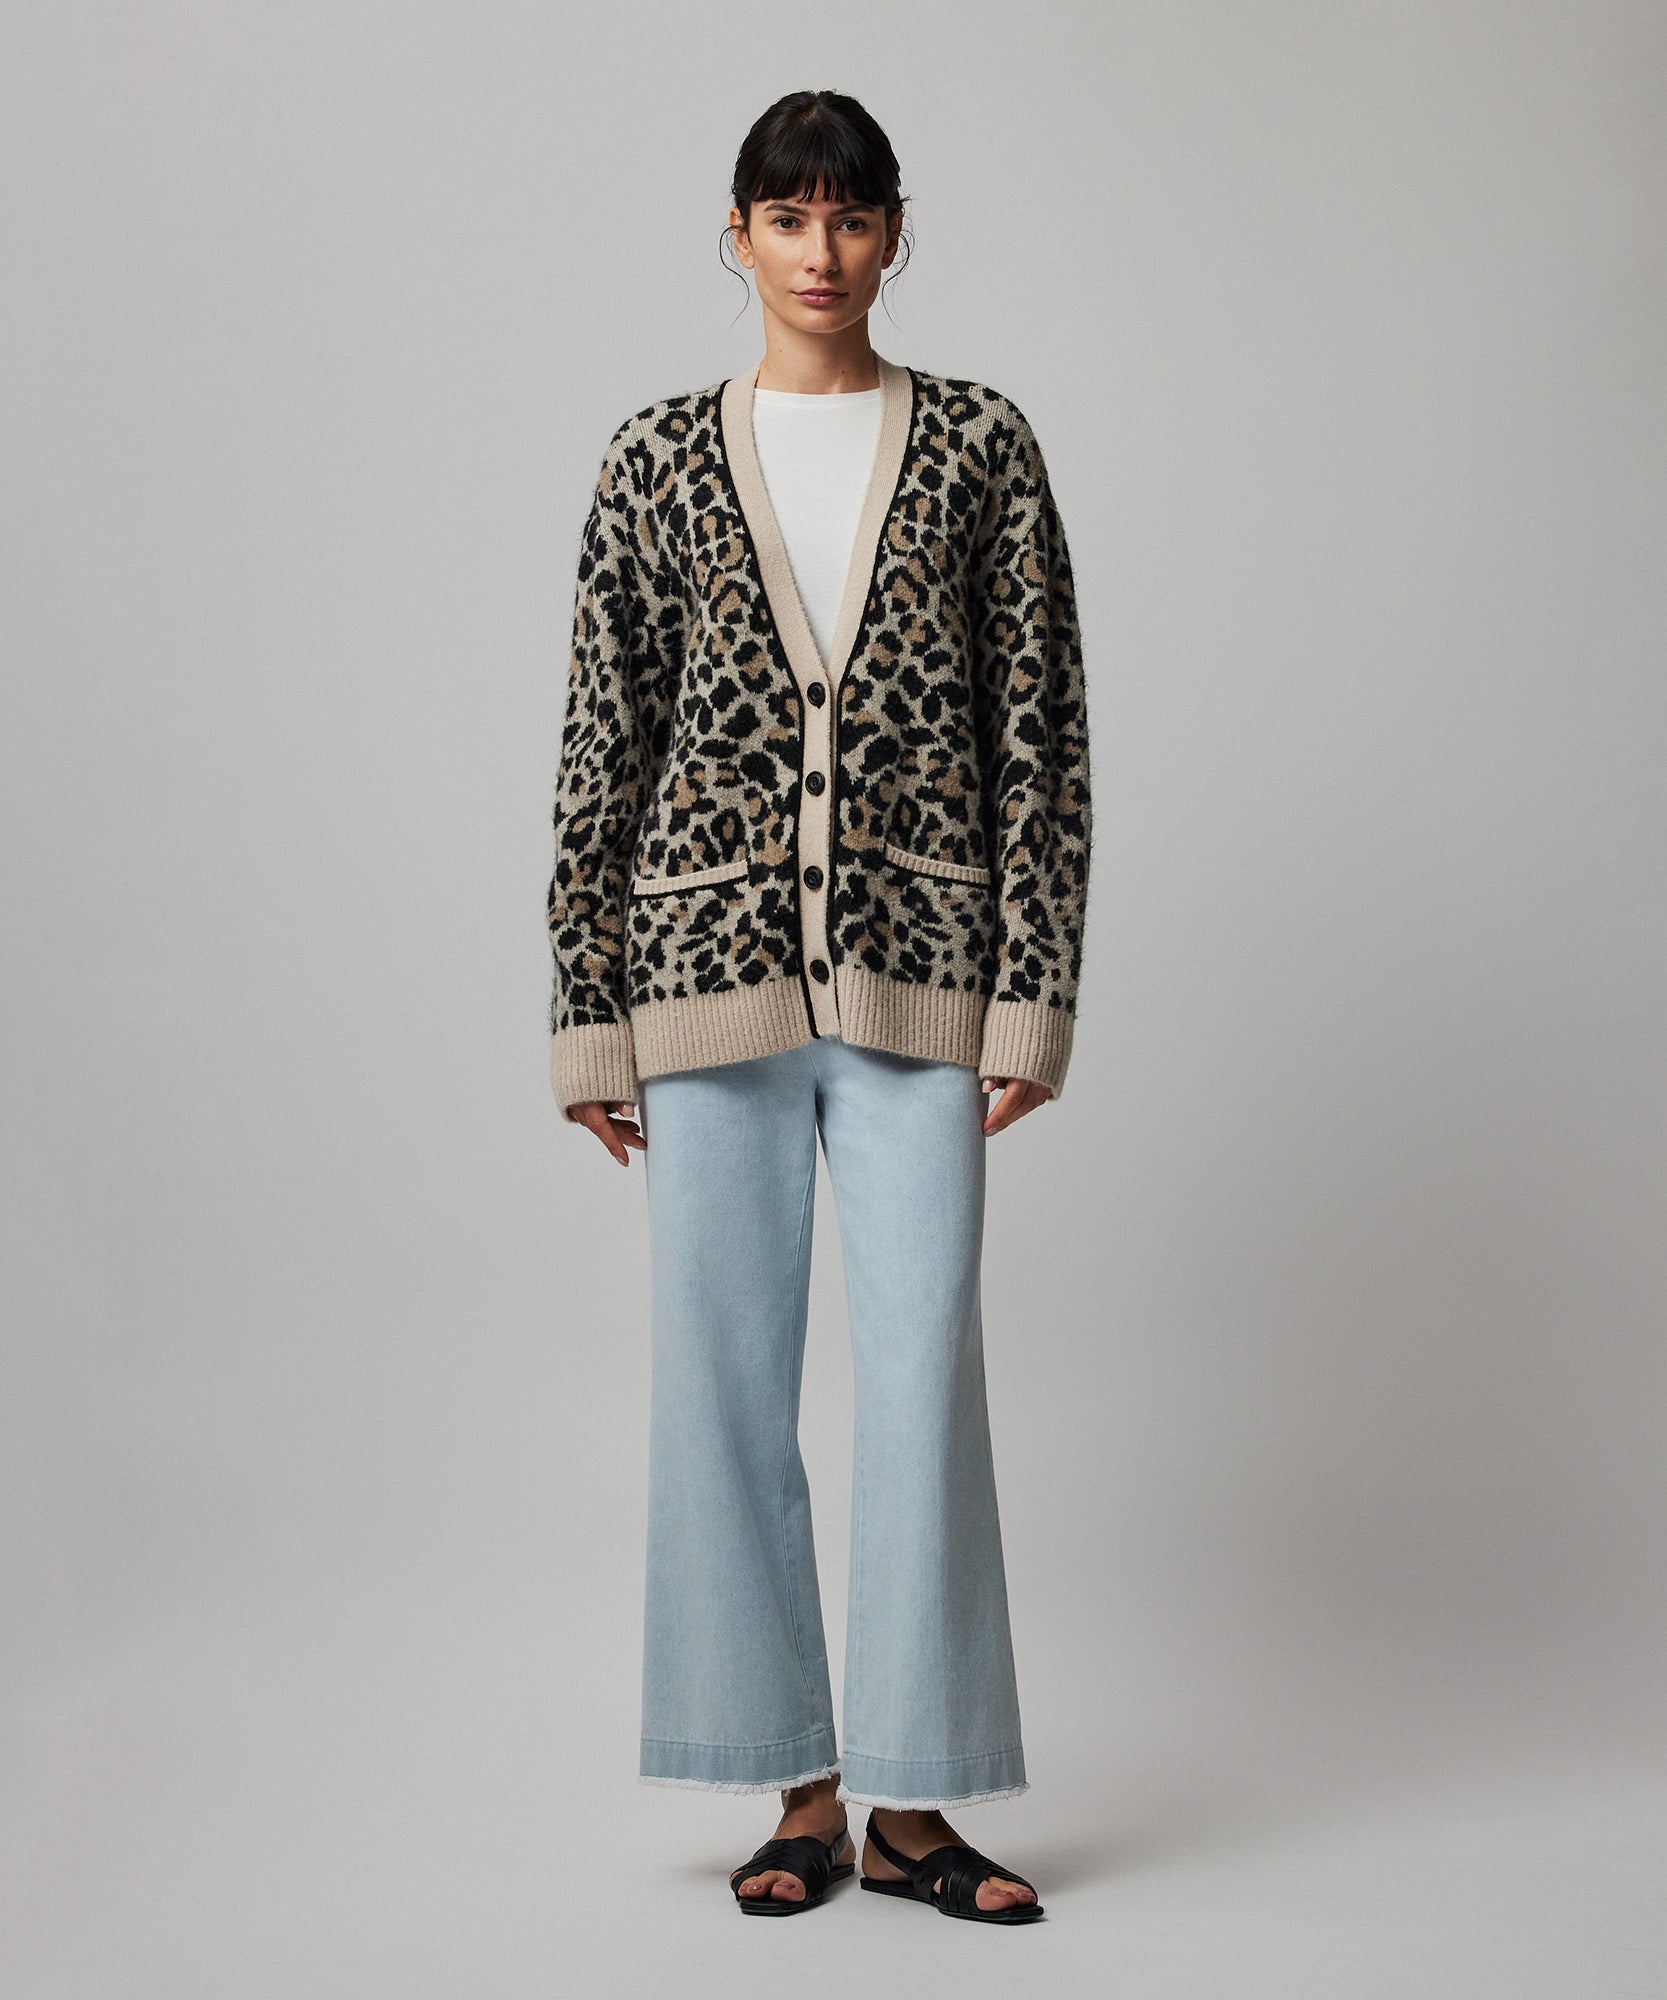 Anna-Kaci Longline Leopard Cardigan Is an Instant Outfit Upgrade